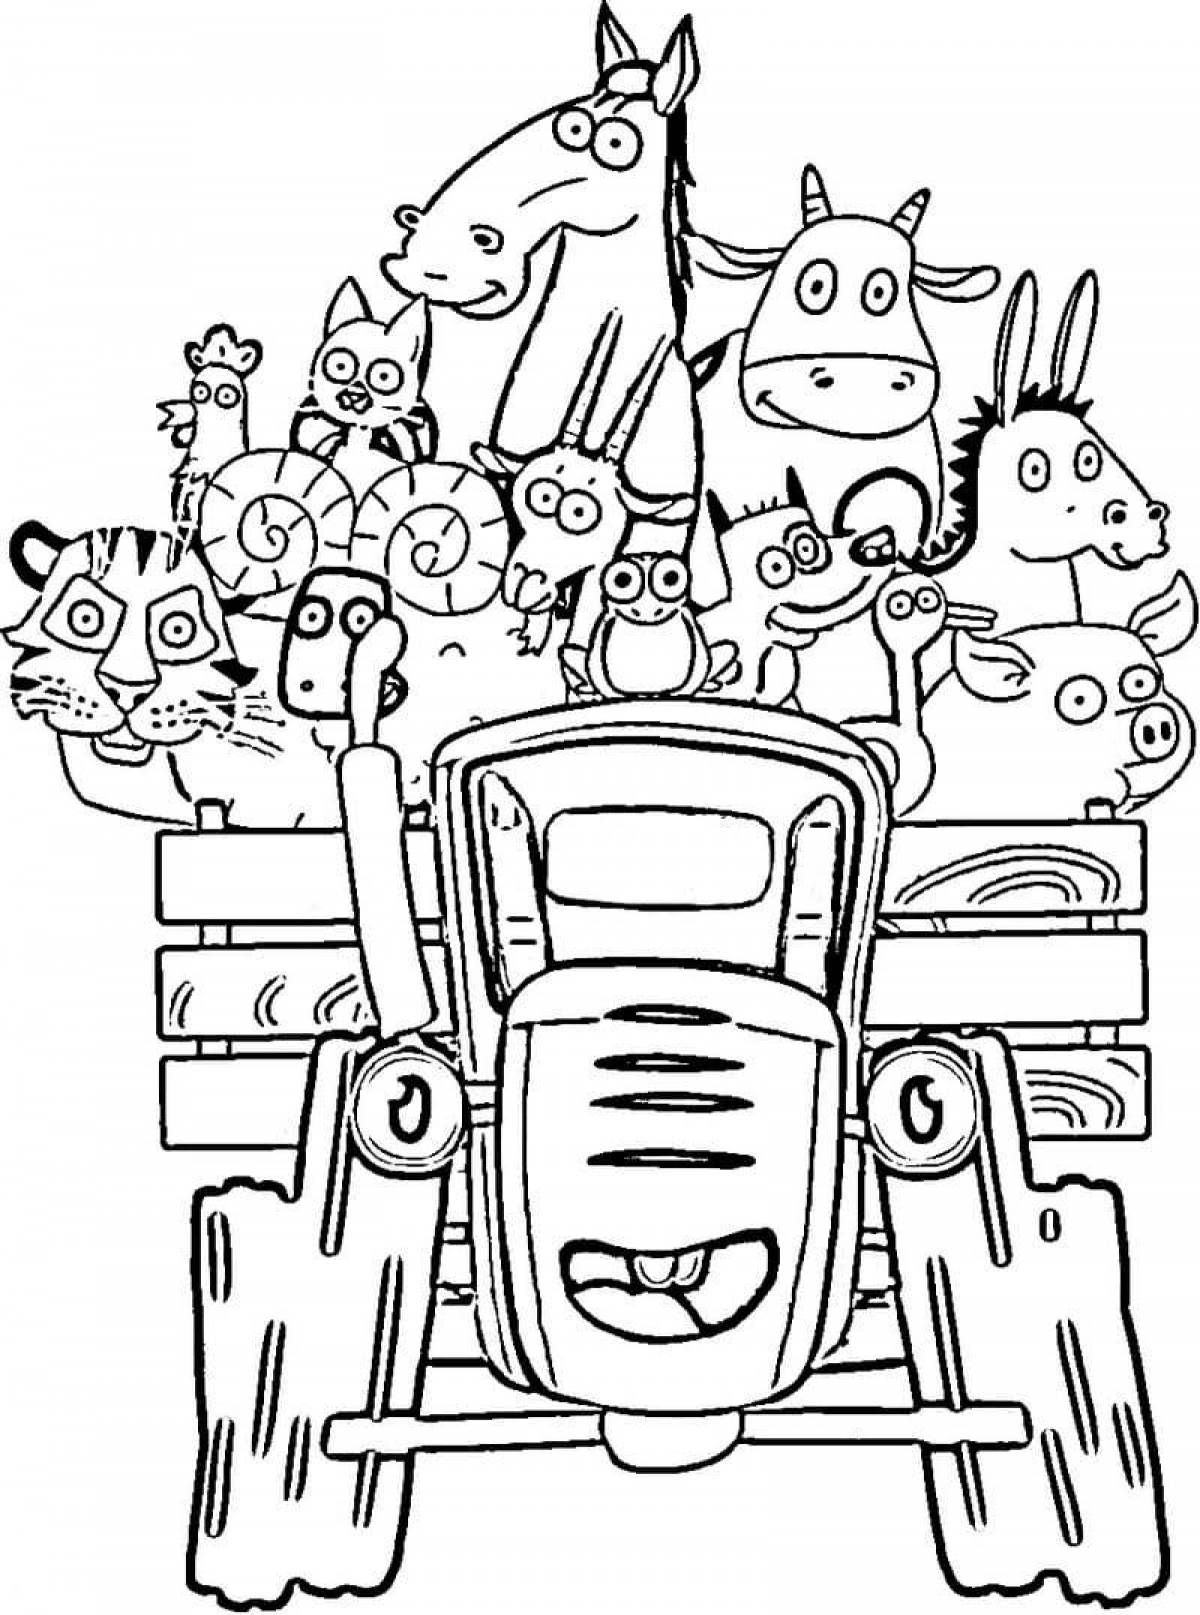 Blue tractor coloring book #2